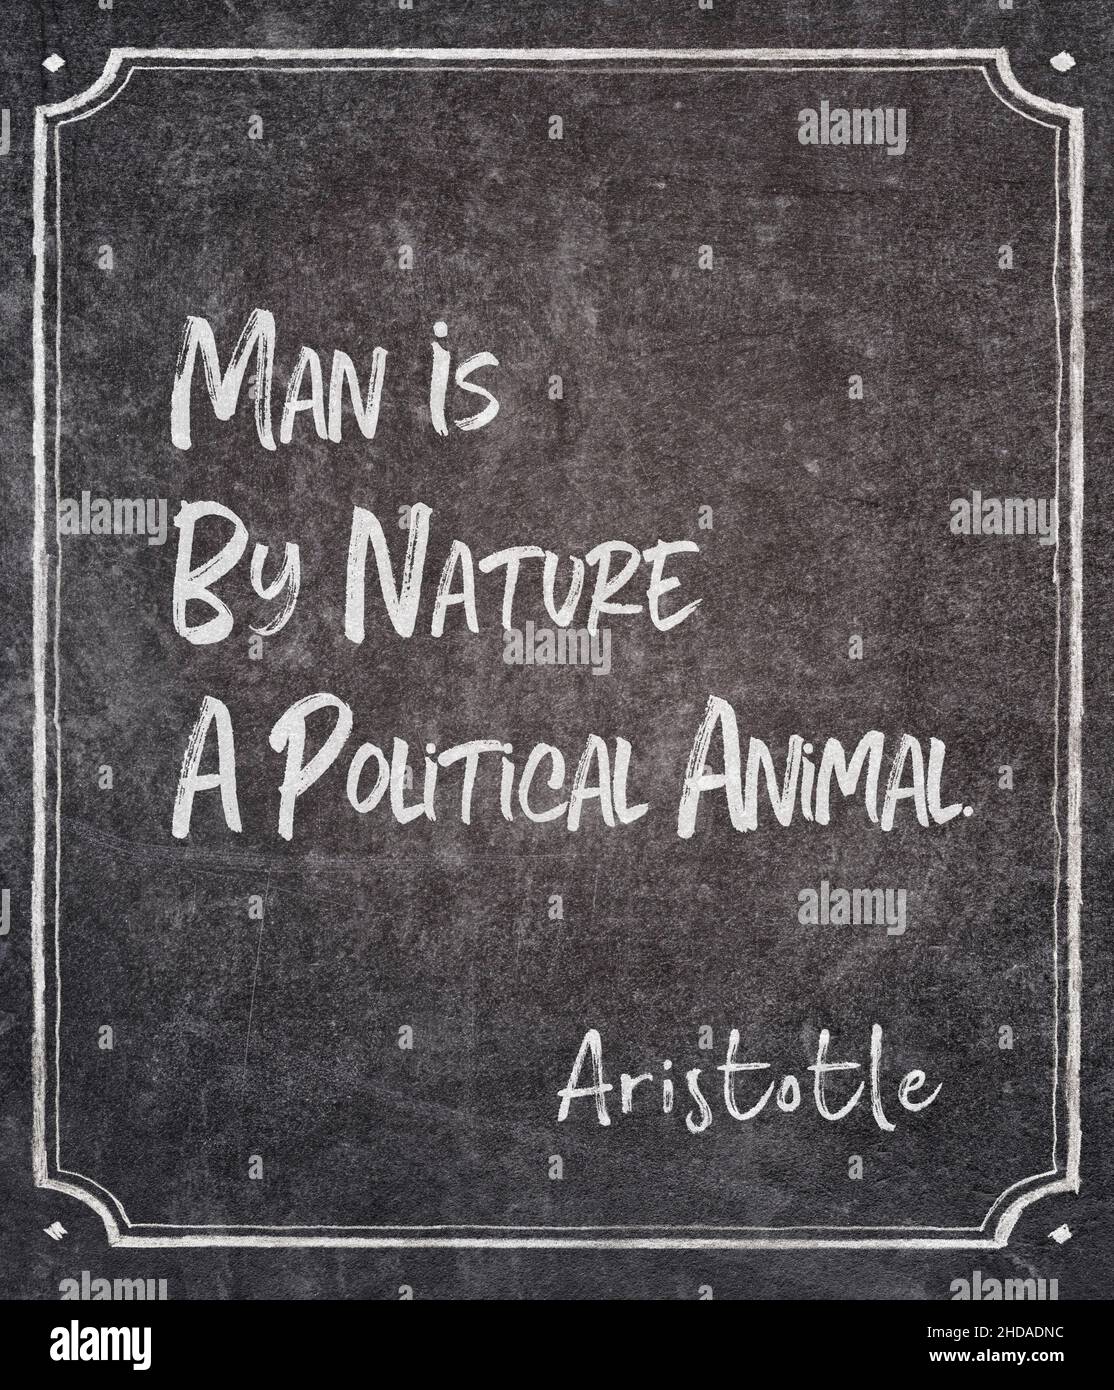 Man is by nature a political animal - ancient Greek philosopher Aristotle quote written on framed chalkboard Stock Photo